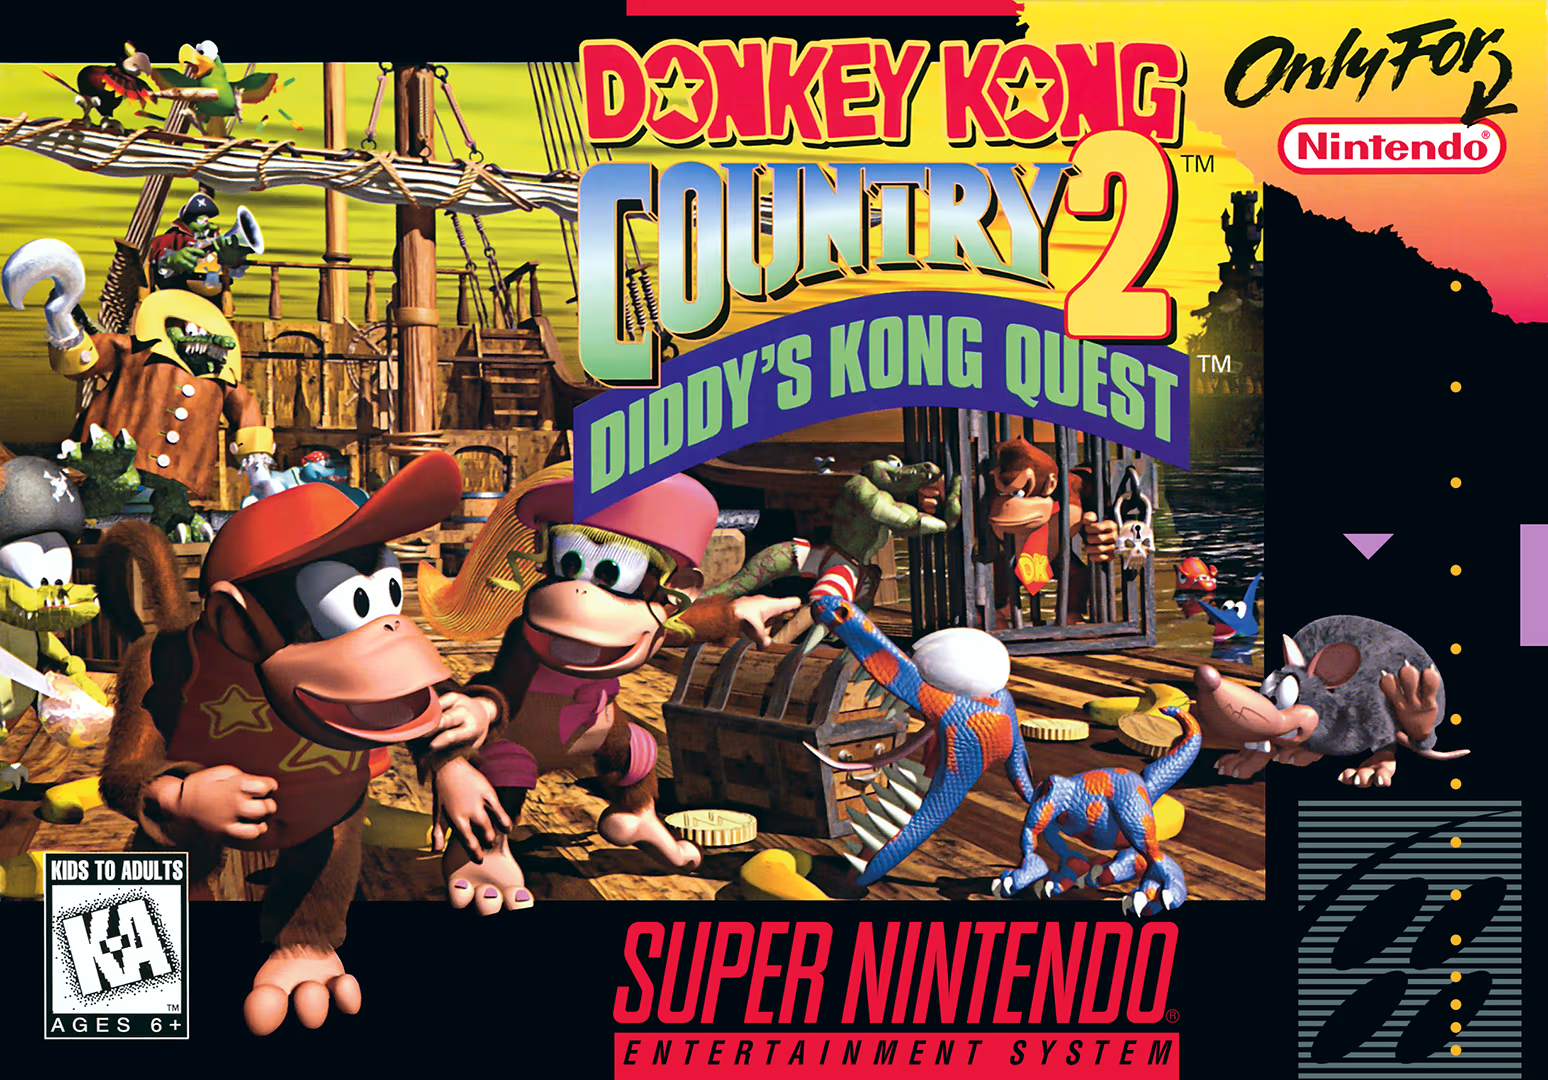 Pirate Panic (Donkey Kong Country 2: Diddy's Kong Quest) - Super Mario Wiki,  the Mario encyclopedia